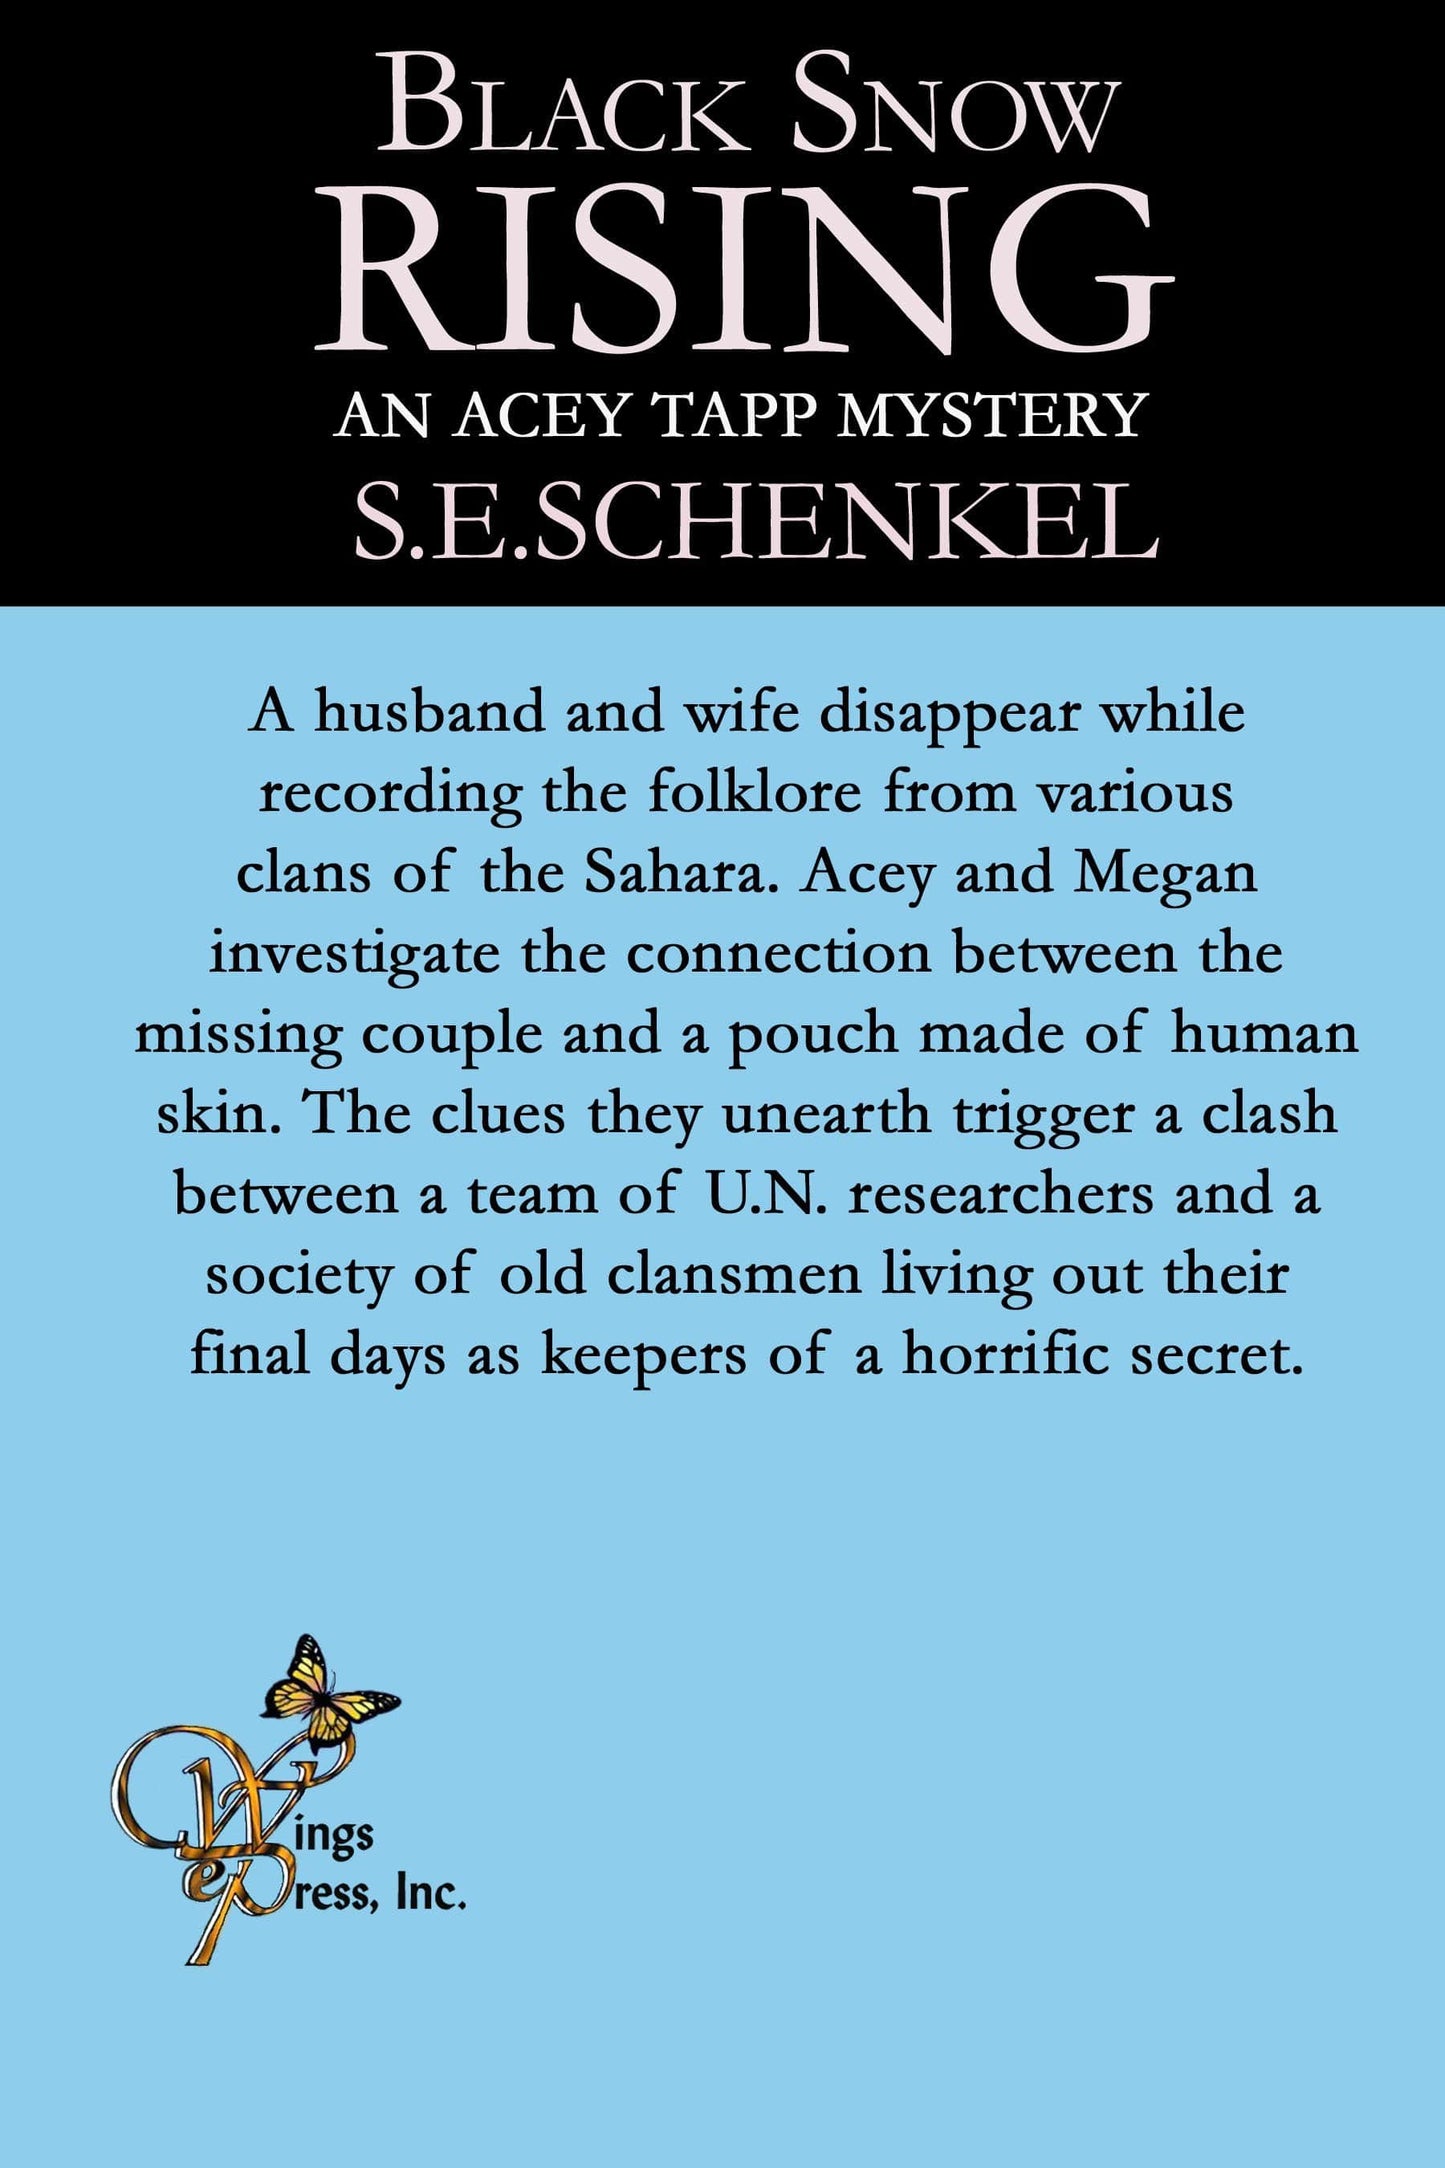 Black Snow Rising (An Acey Tapp Mystery)